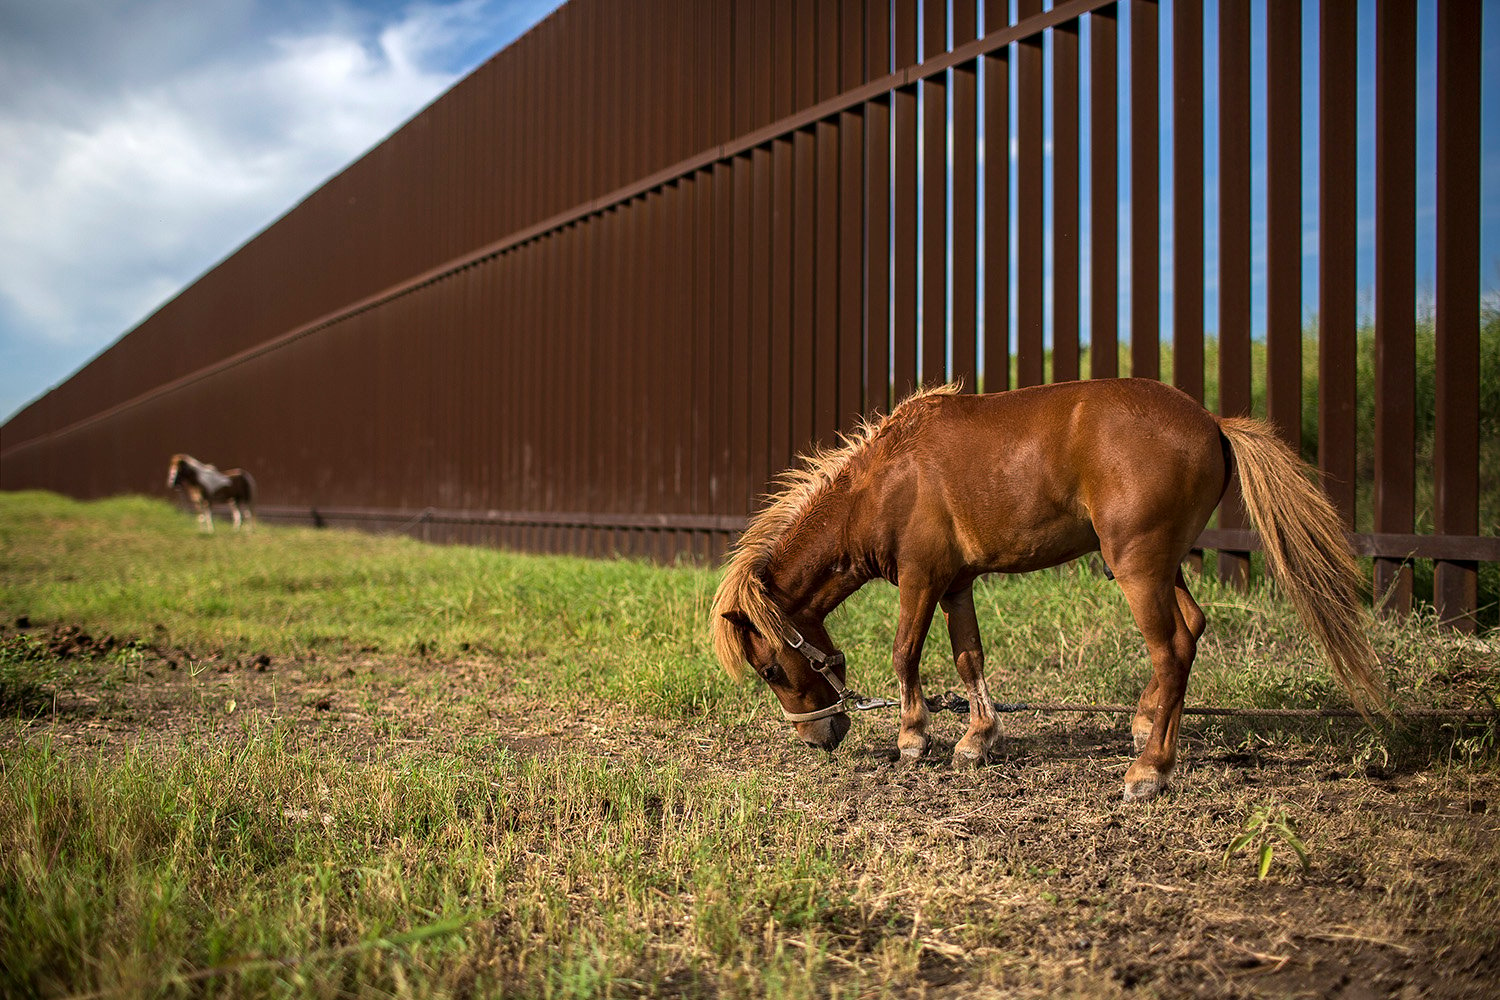 Ponies graze next to the border fence in Cameron County, Texas. The federal government seized residents’ property across the Rio Grande Valley to build the fence a decade ago.